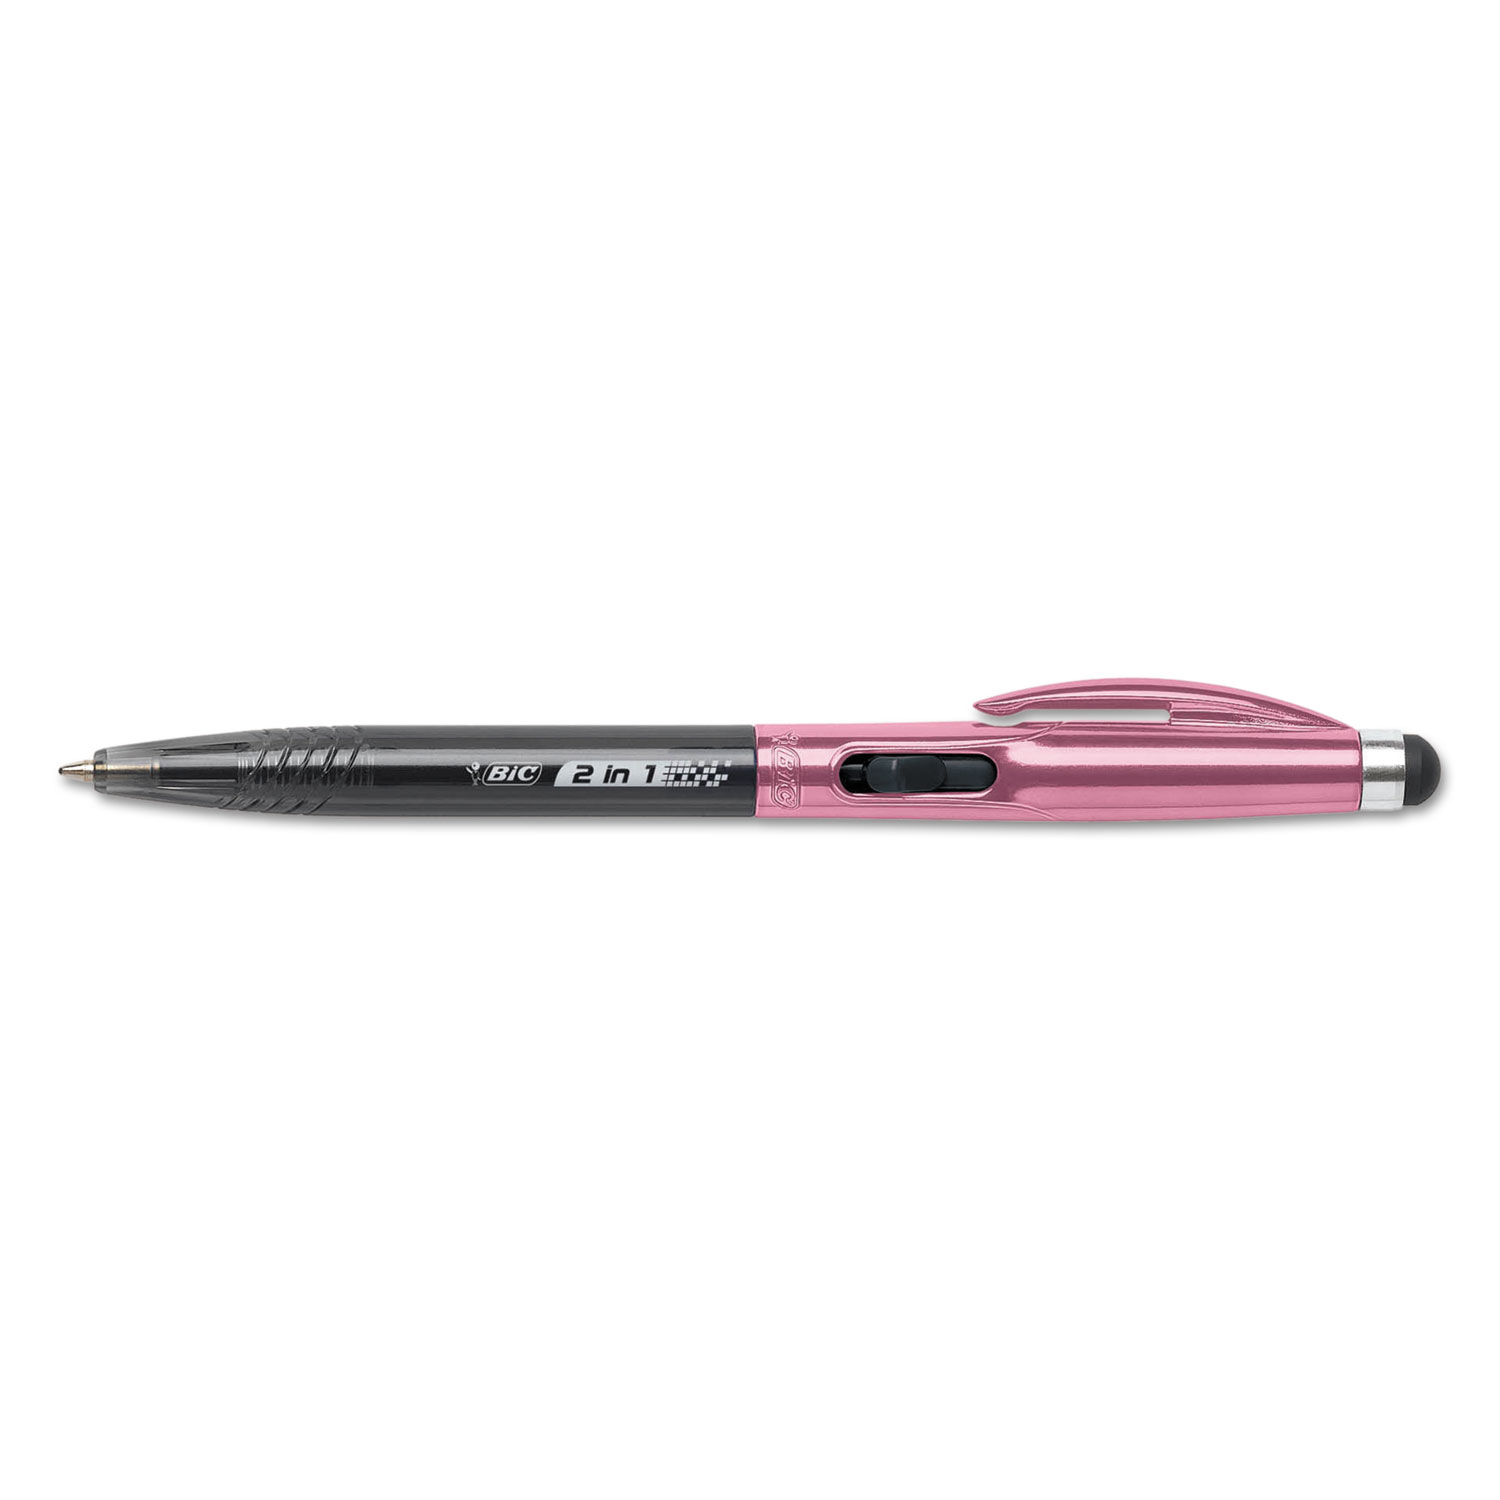 Tech 2 in 1 Stylus Pen, Breast Cancer Awareness, Pink